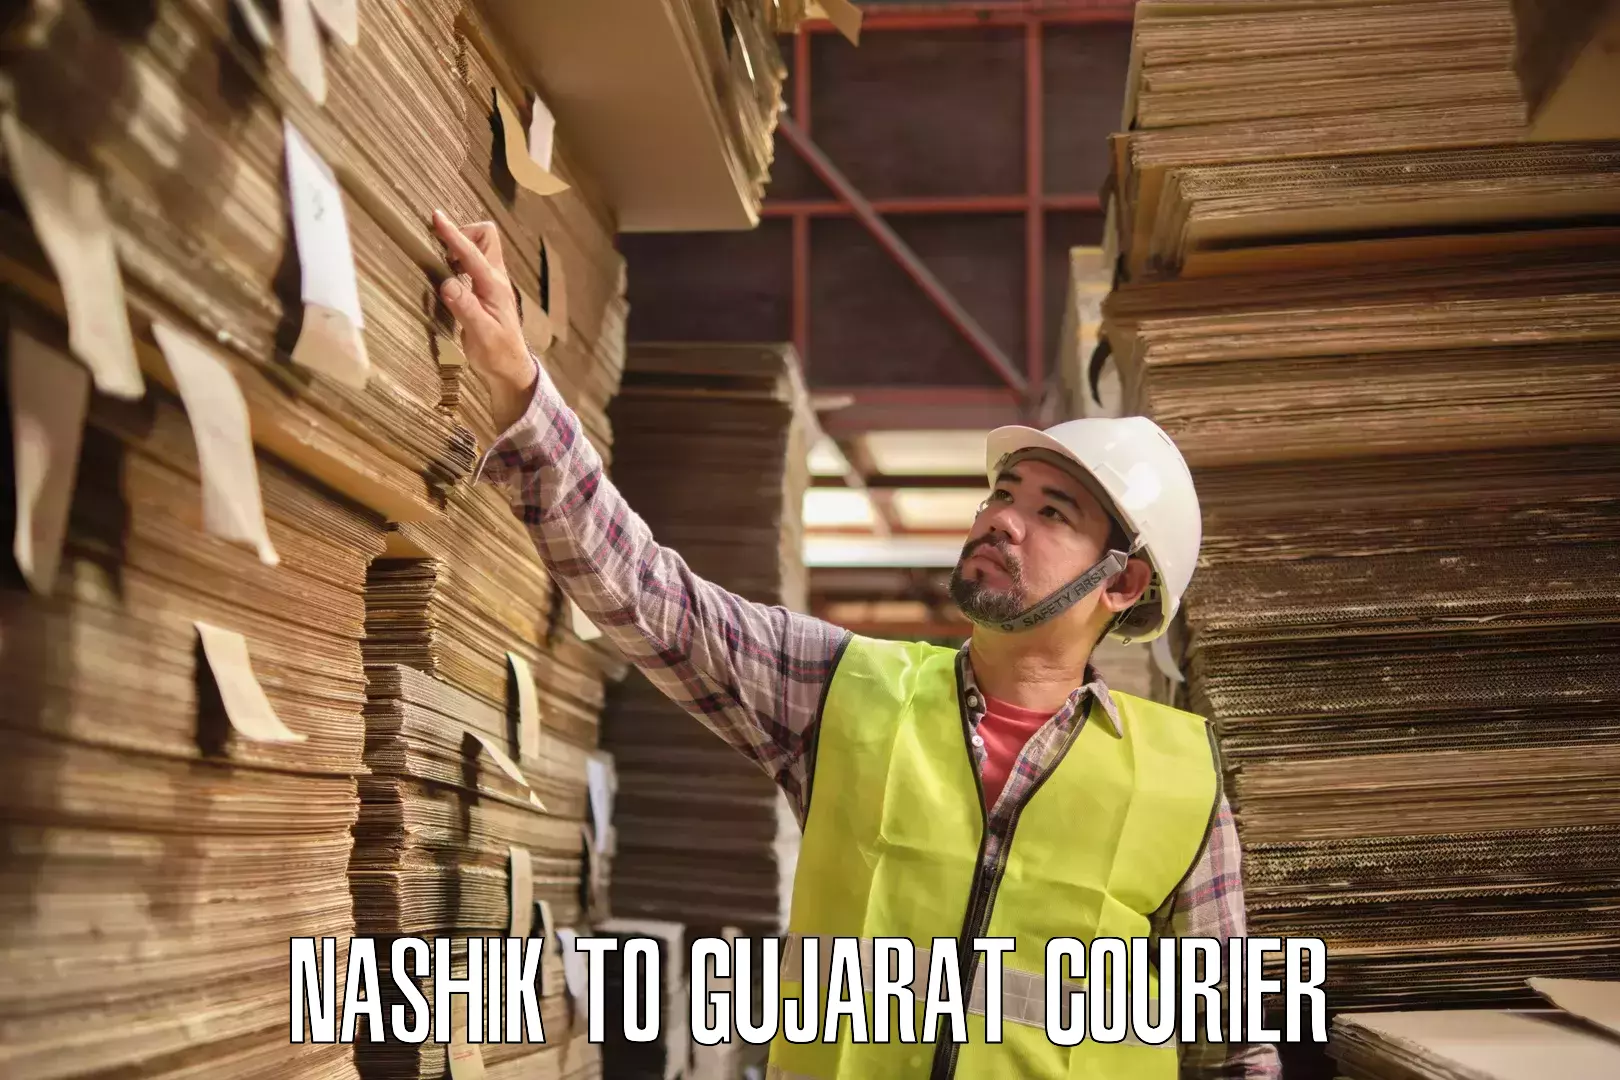 State-of-the-art courier technology Nashik to Gujarat